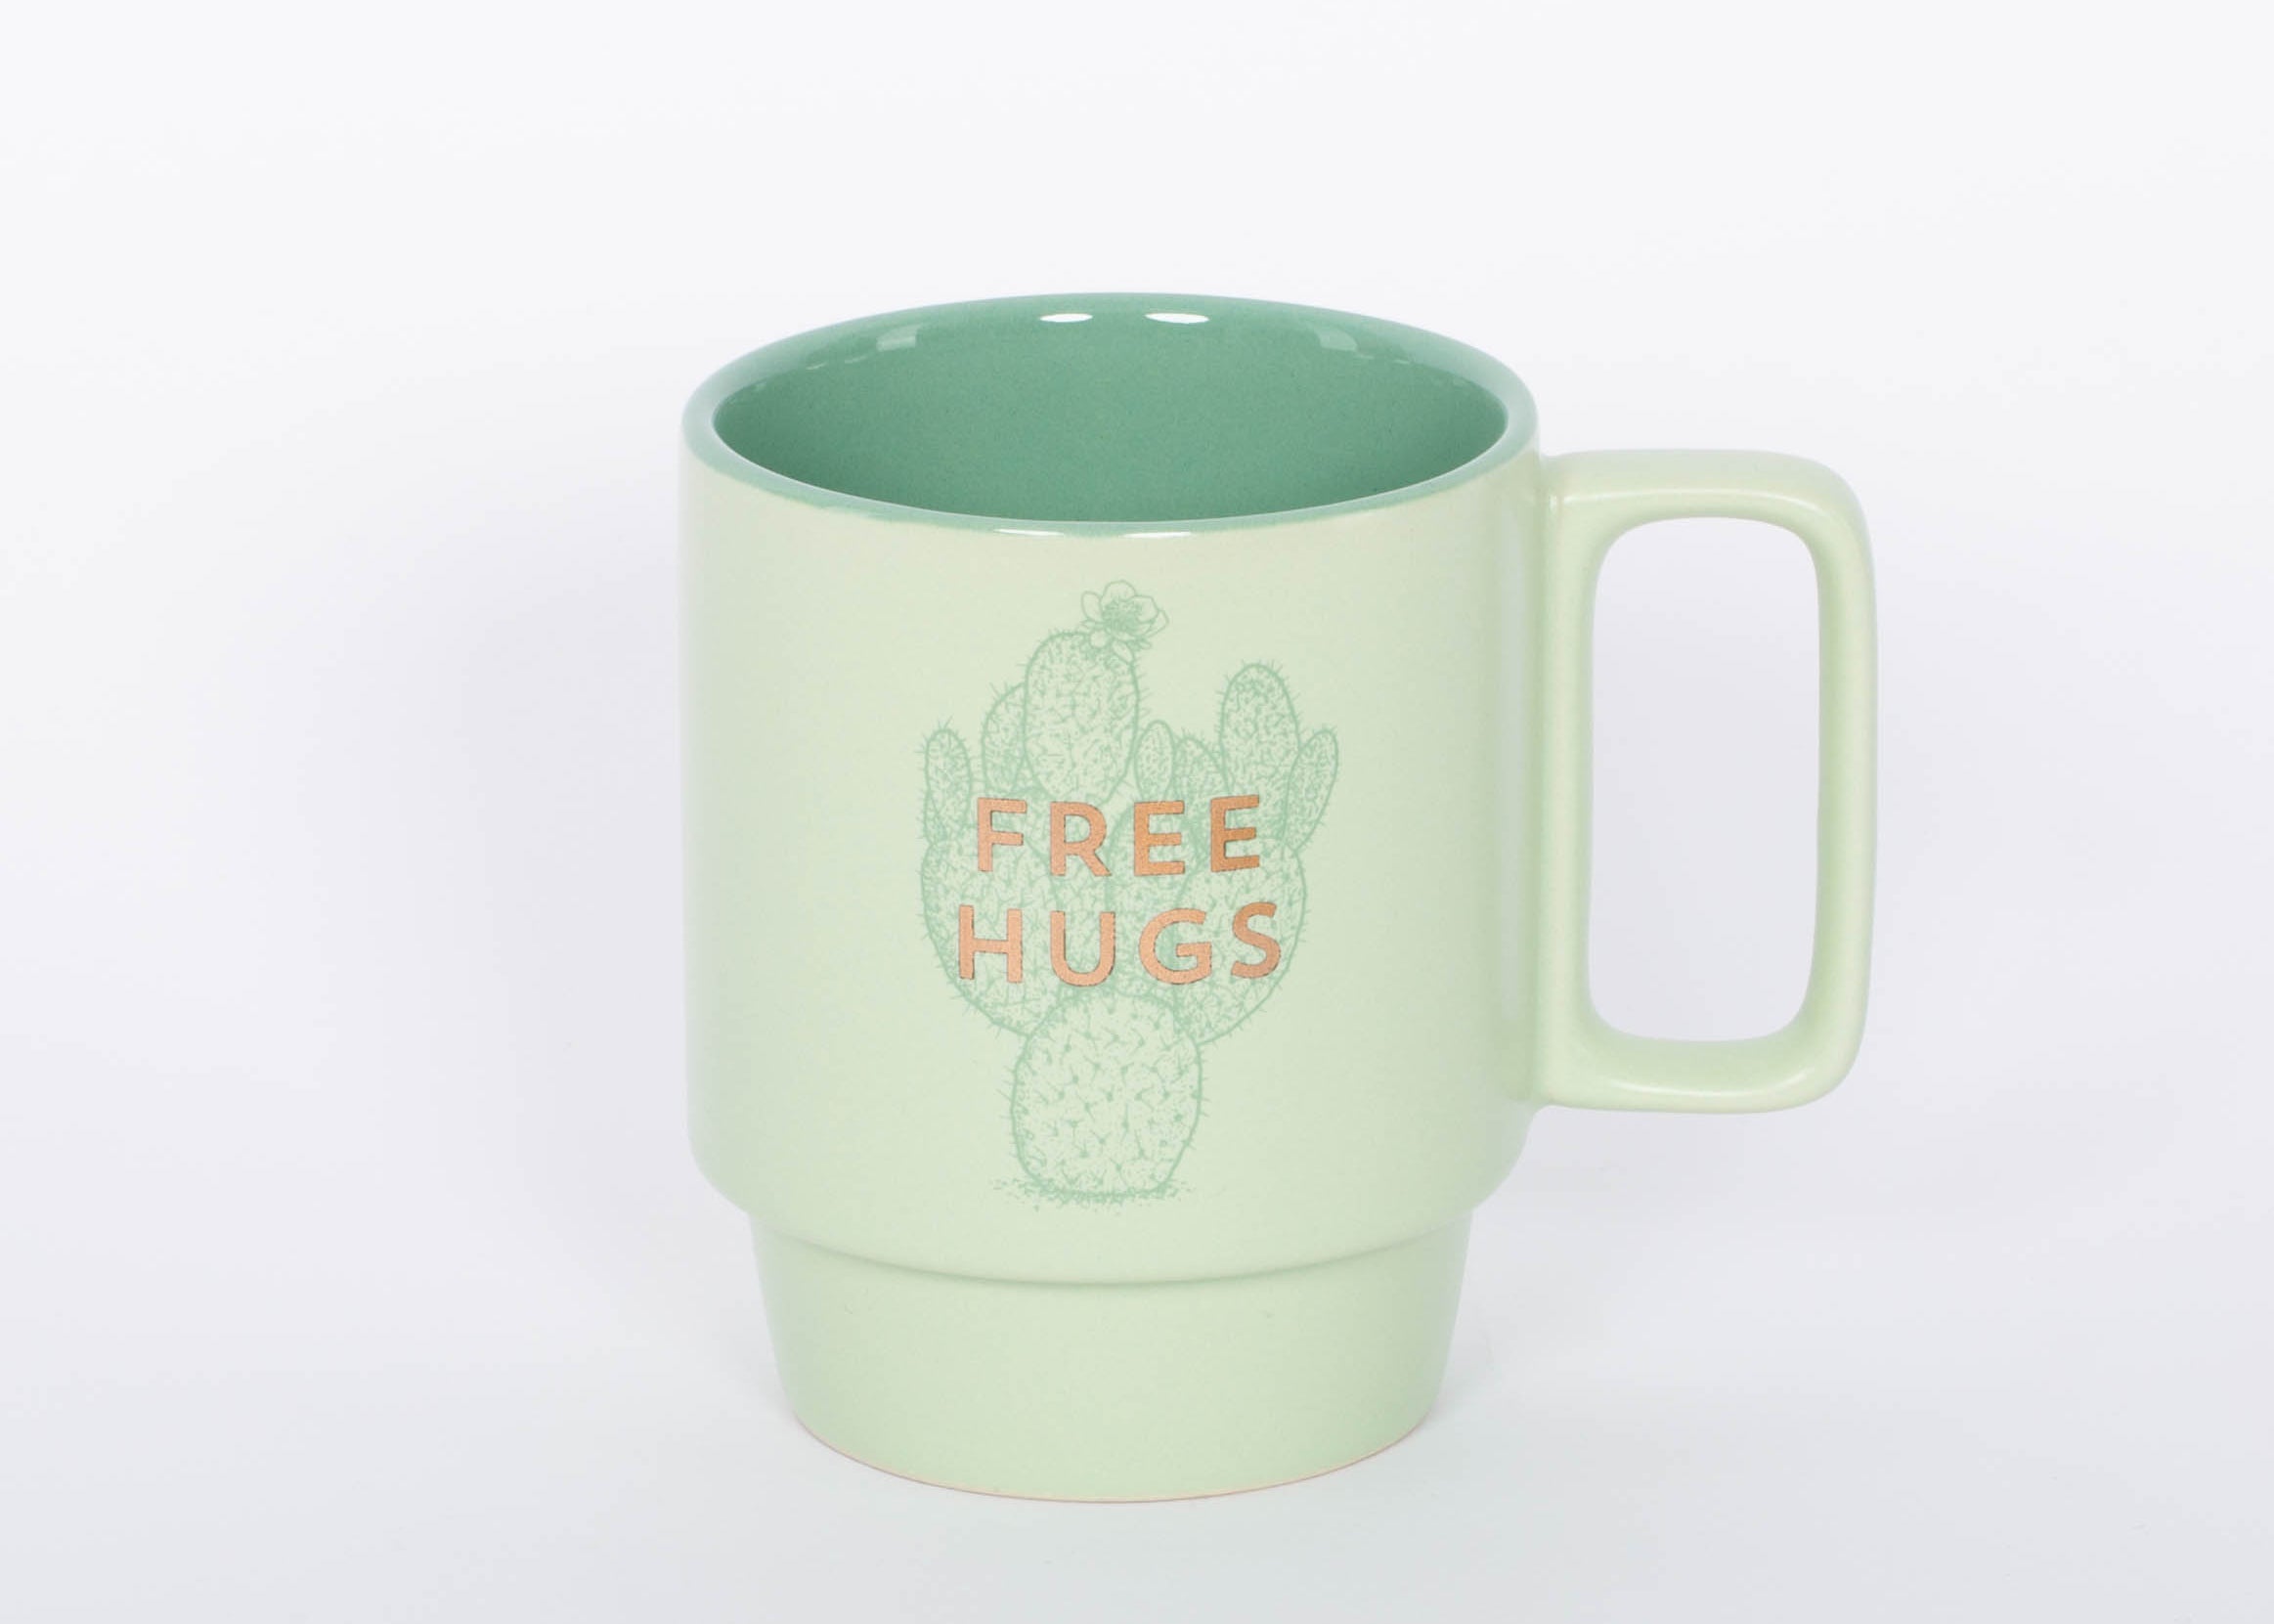 Free Hugs Mug. Crafted of high-quality ceramic, this stackable mug features a sassy sentiment in metallic gold lettering. This 12 oz. cactus mug is the perfect companion to your morning routine whether it's for a cup of coffee, hot cocoa, or tea. It also makes a great gift for the plant lover in your life!